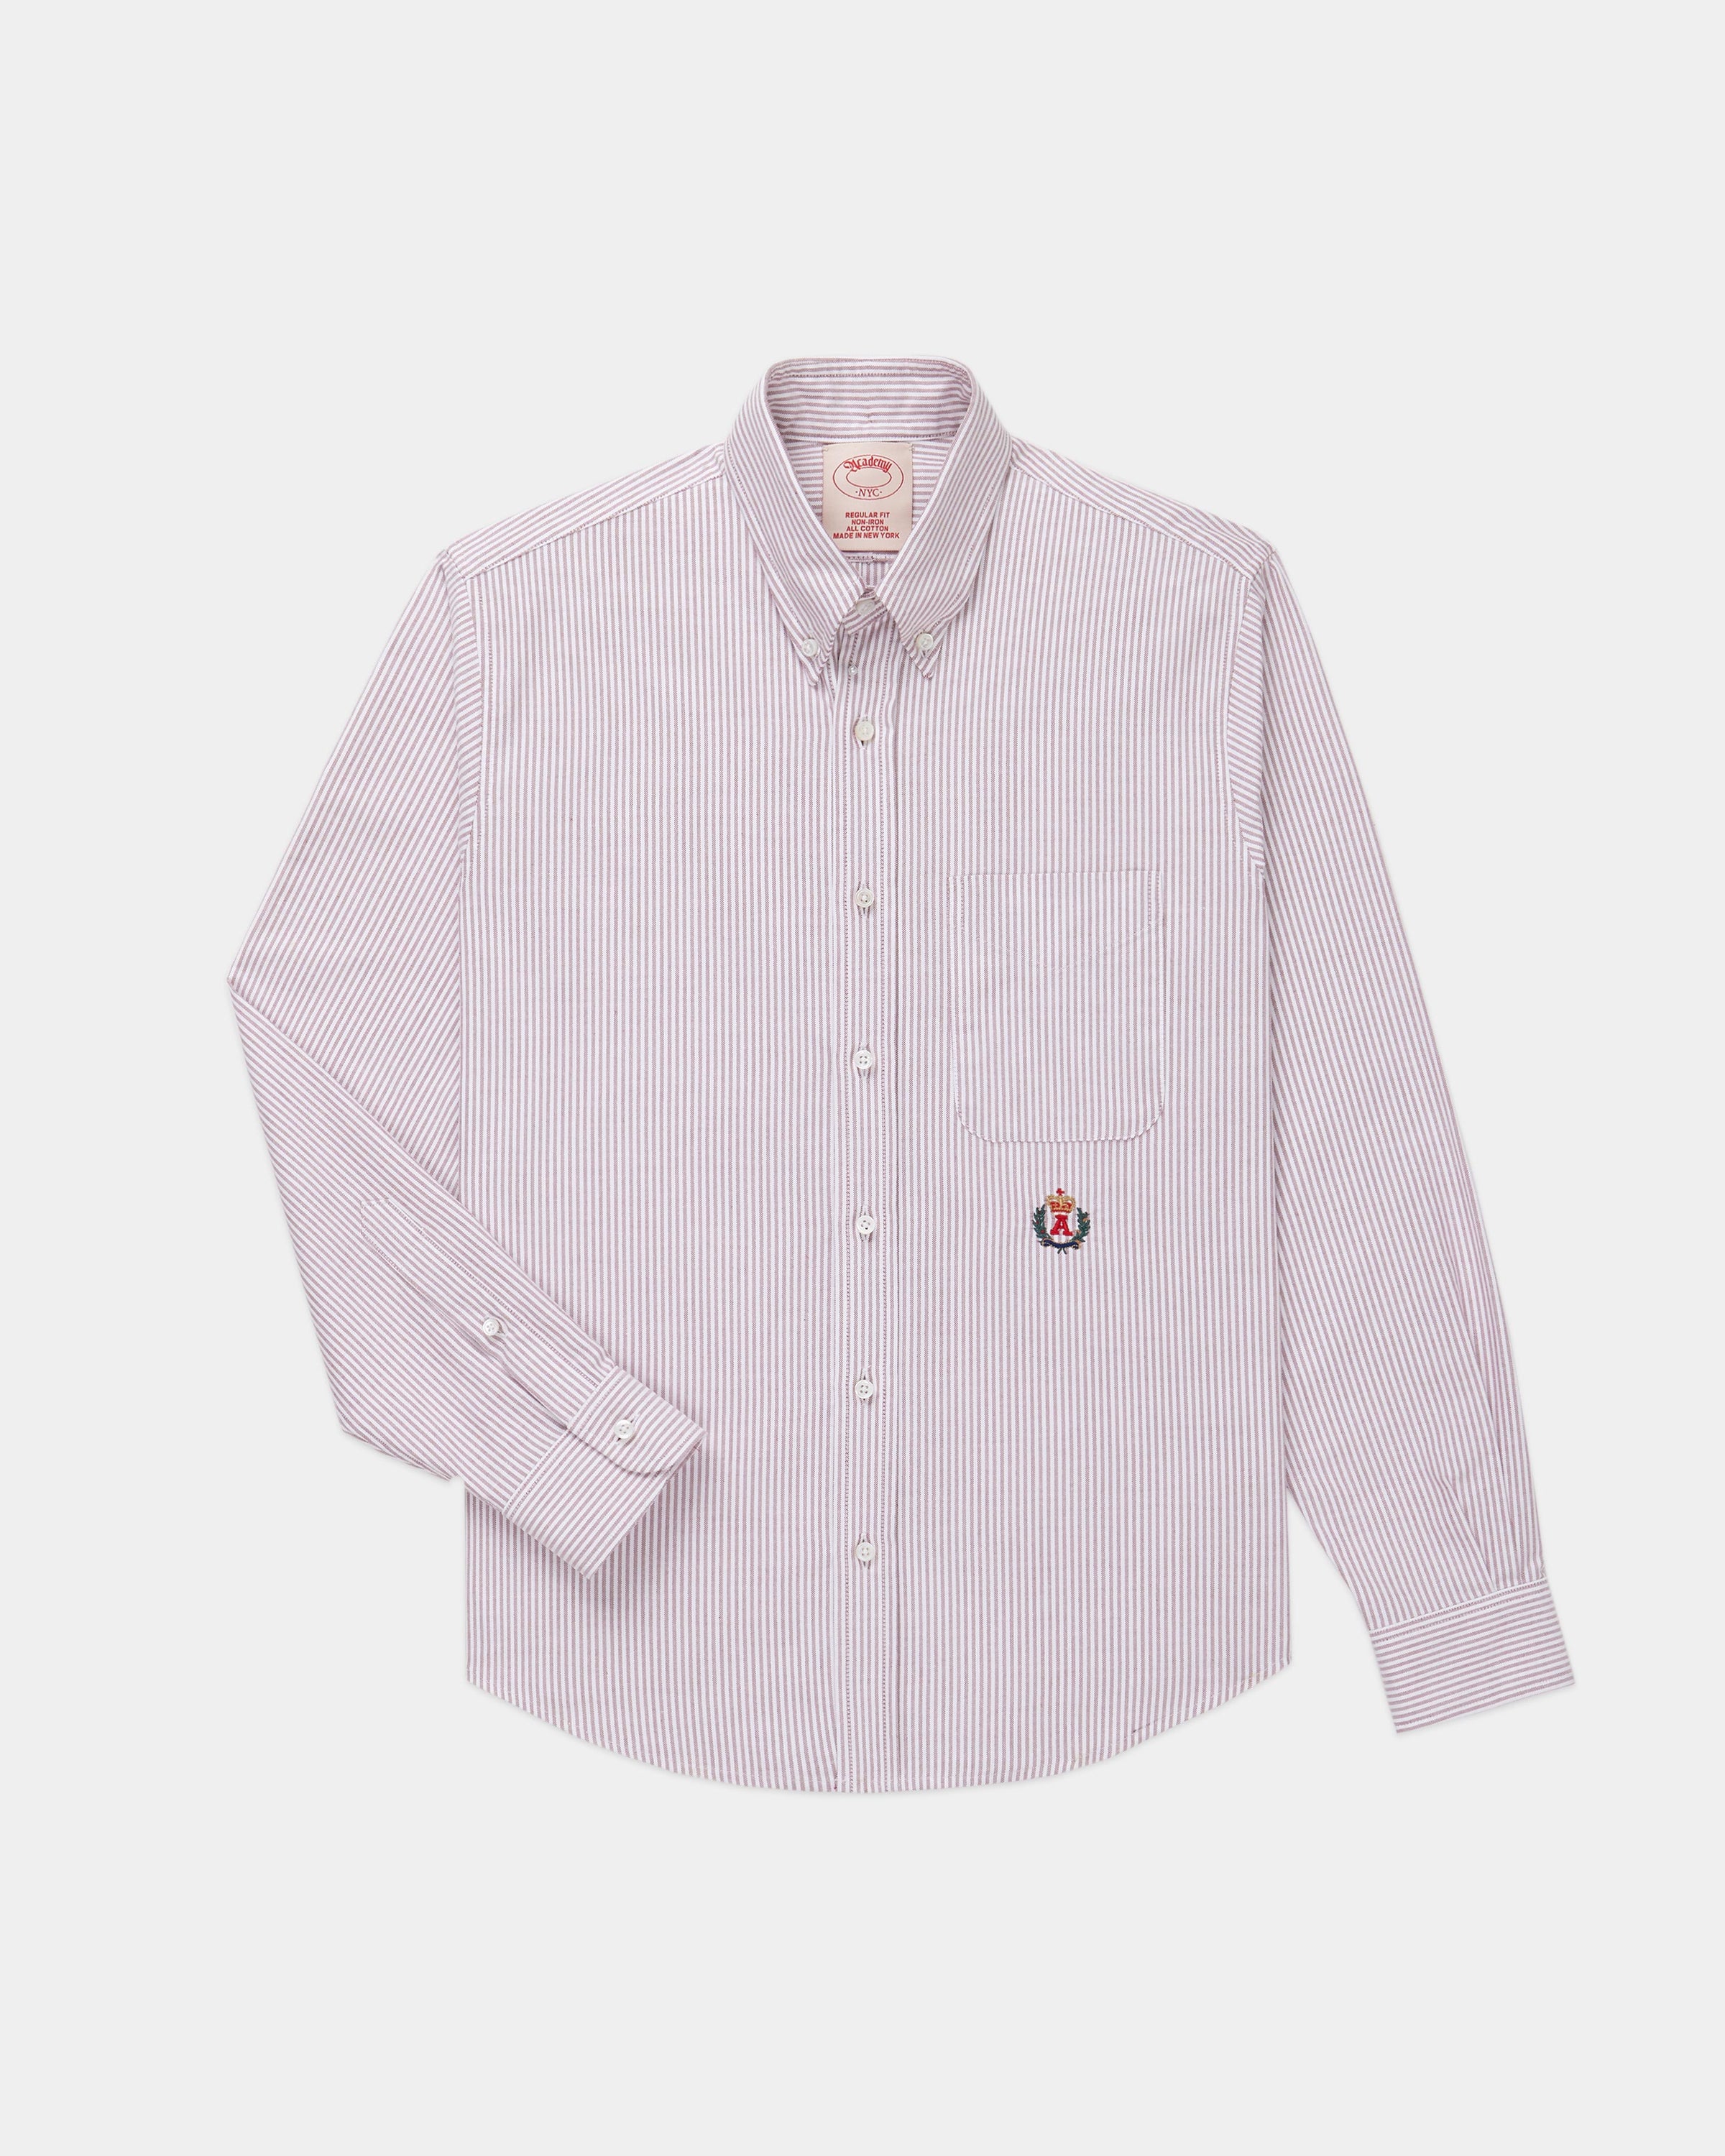 The Standard Issue Oxford, Red Stripe